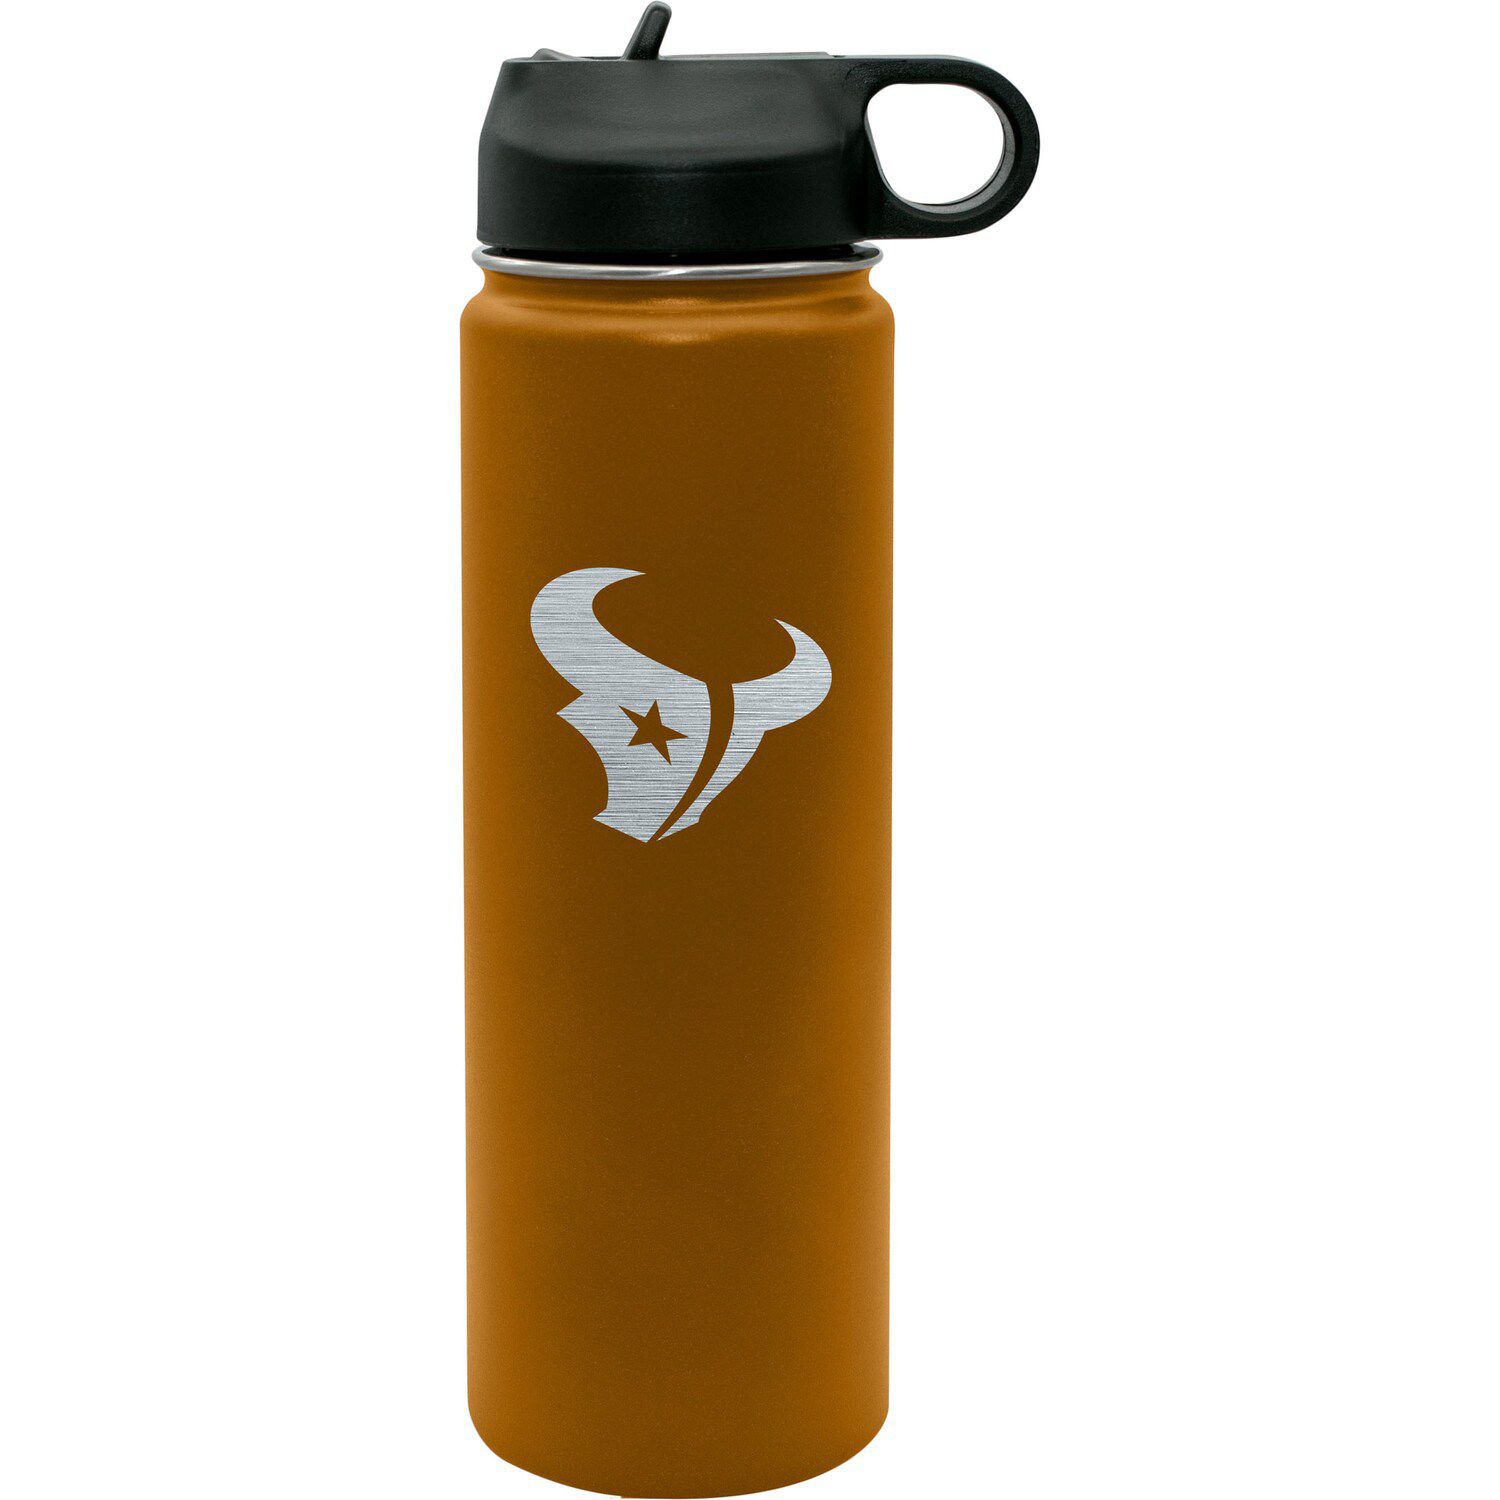 17 oz. Insulated Water Bottle Pink Gradient Orca